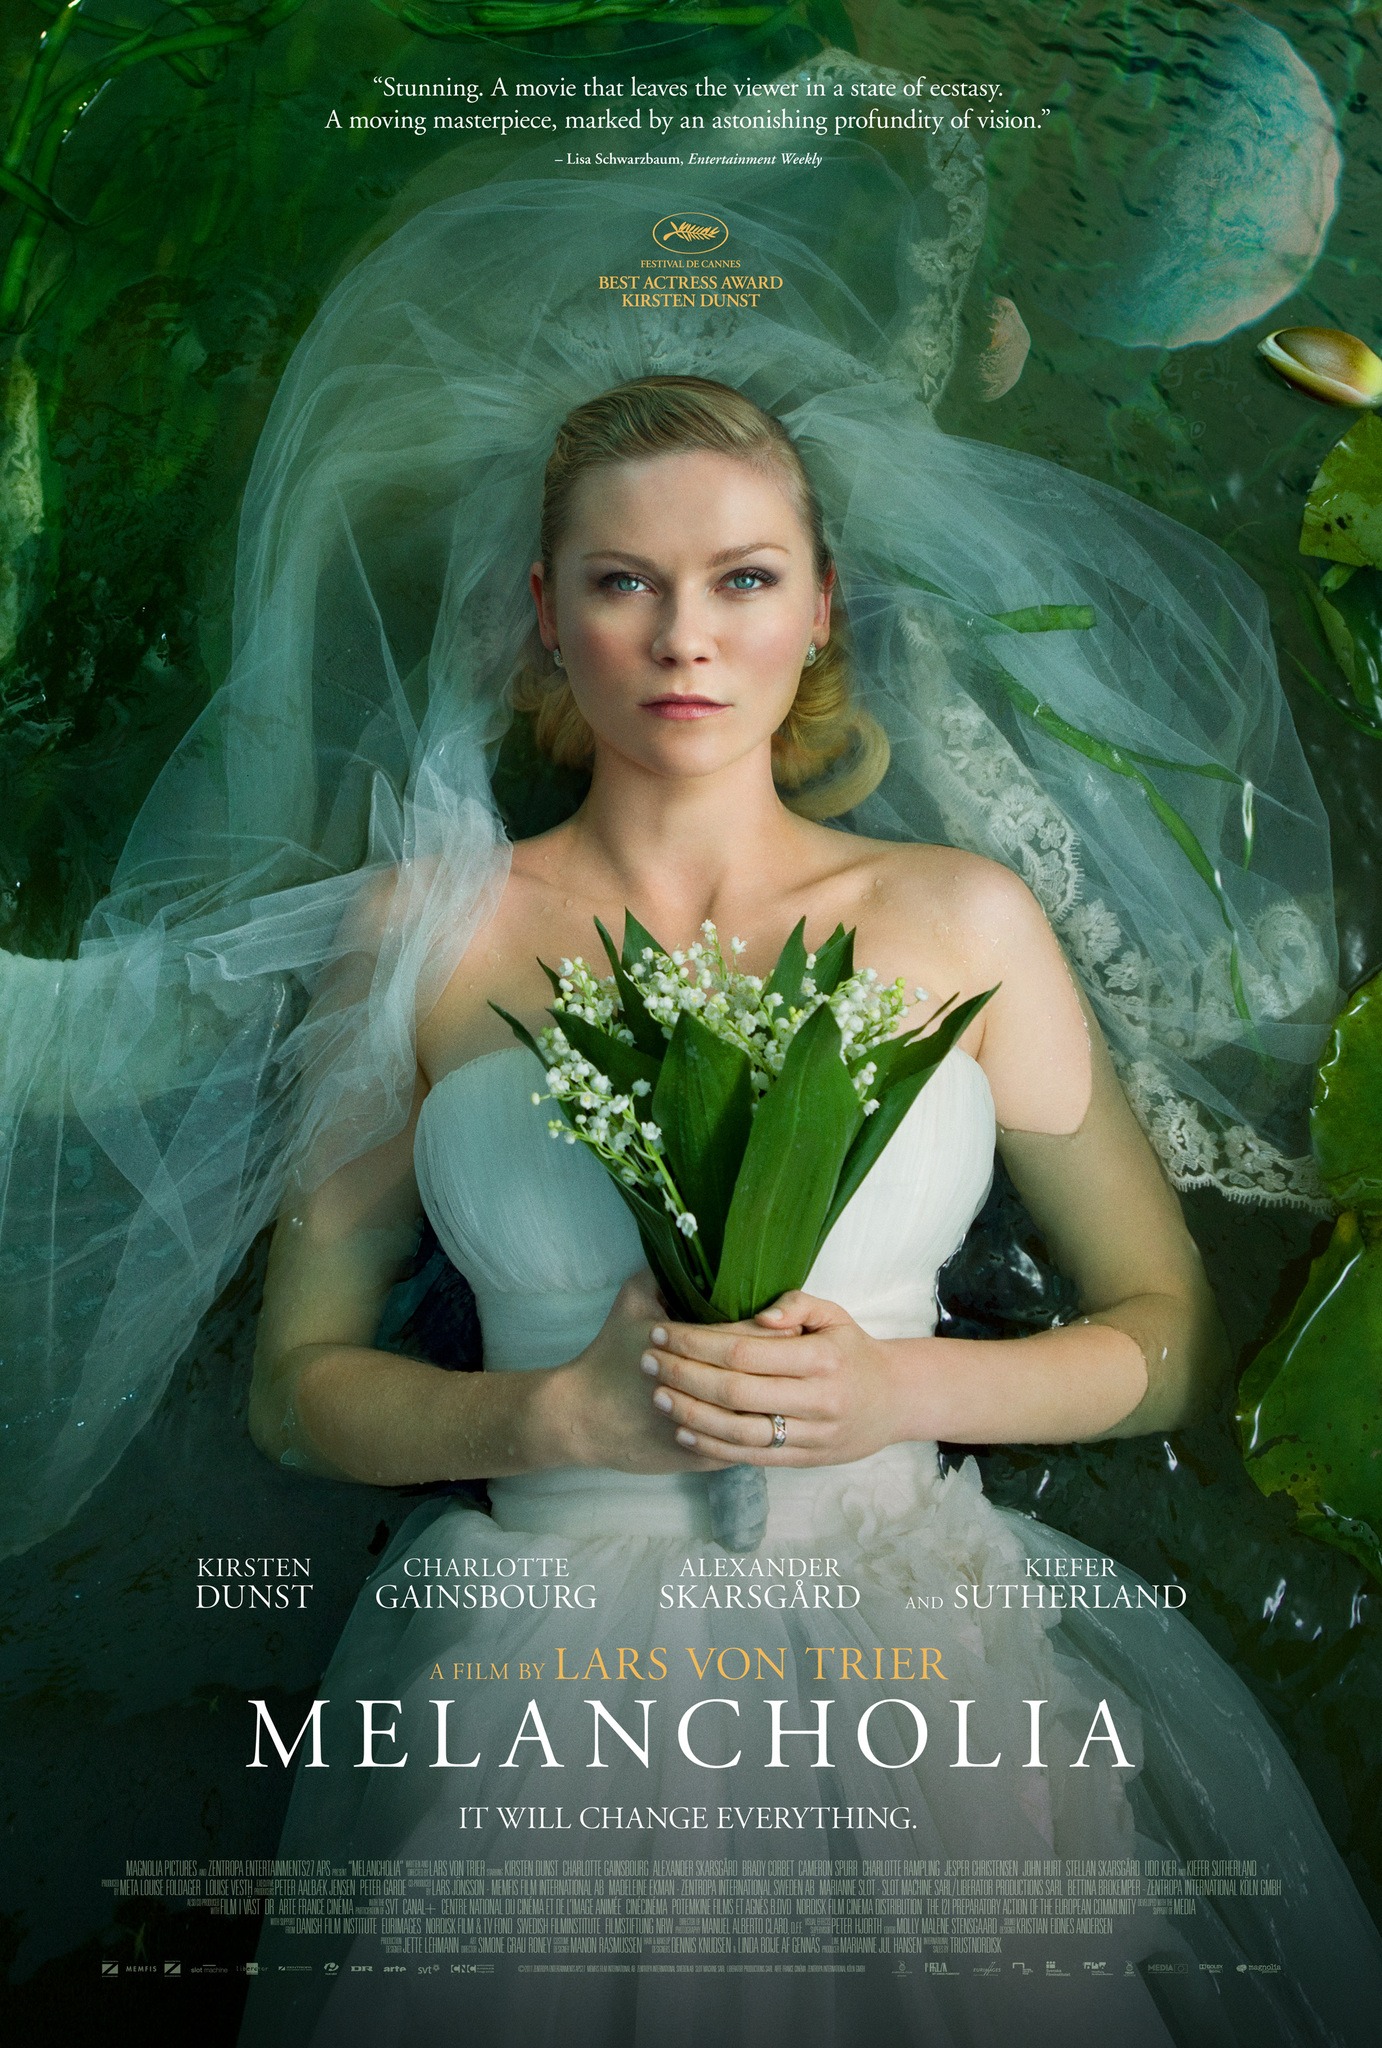 Melancholia (2011)-Movies on Mental illness which Everyone Should Watch